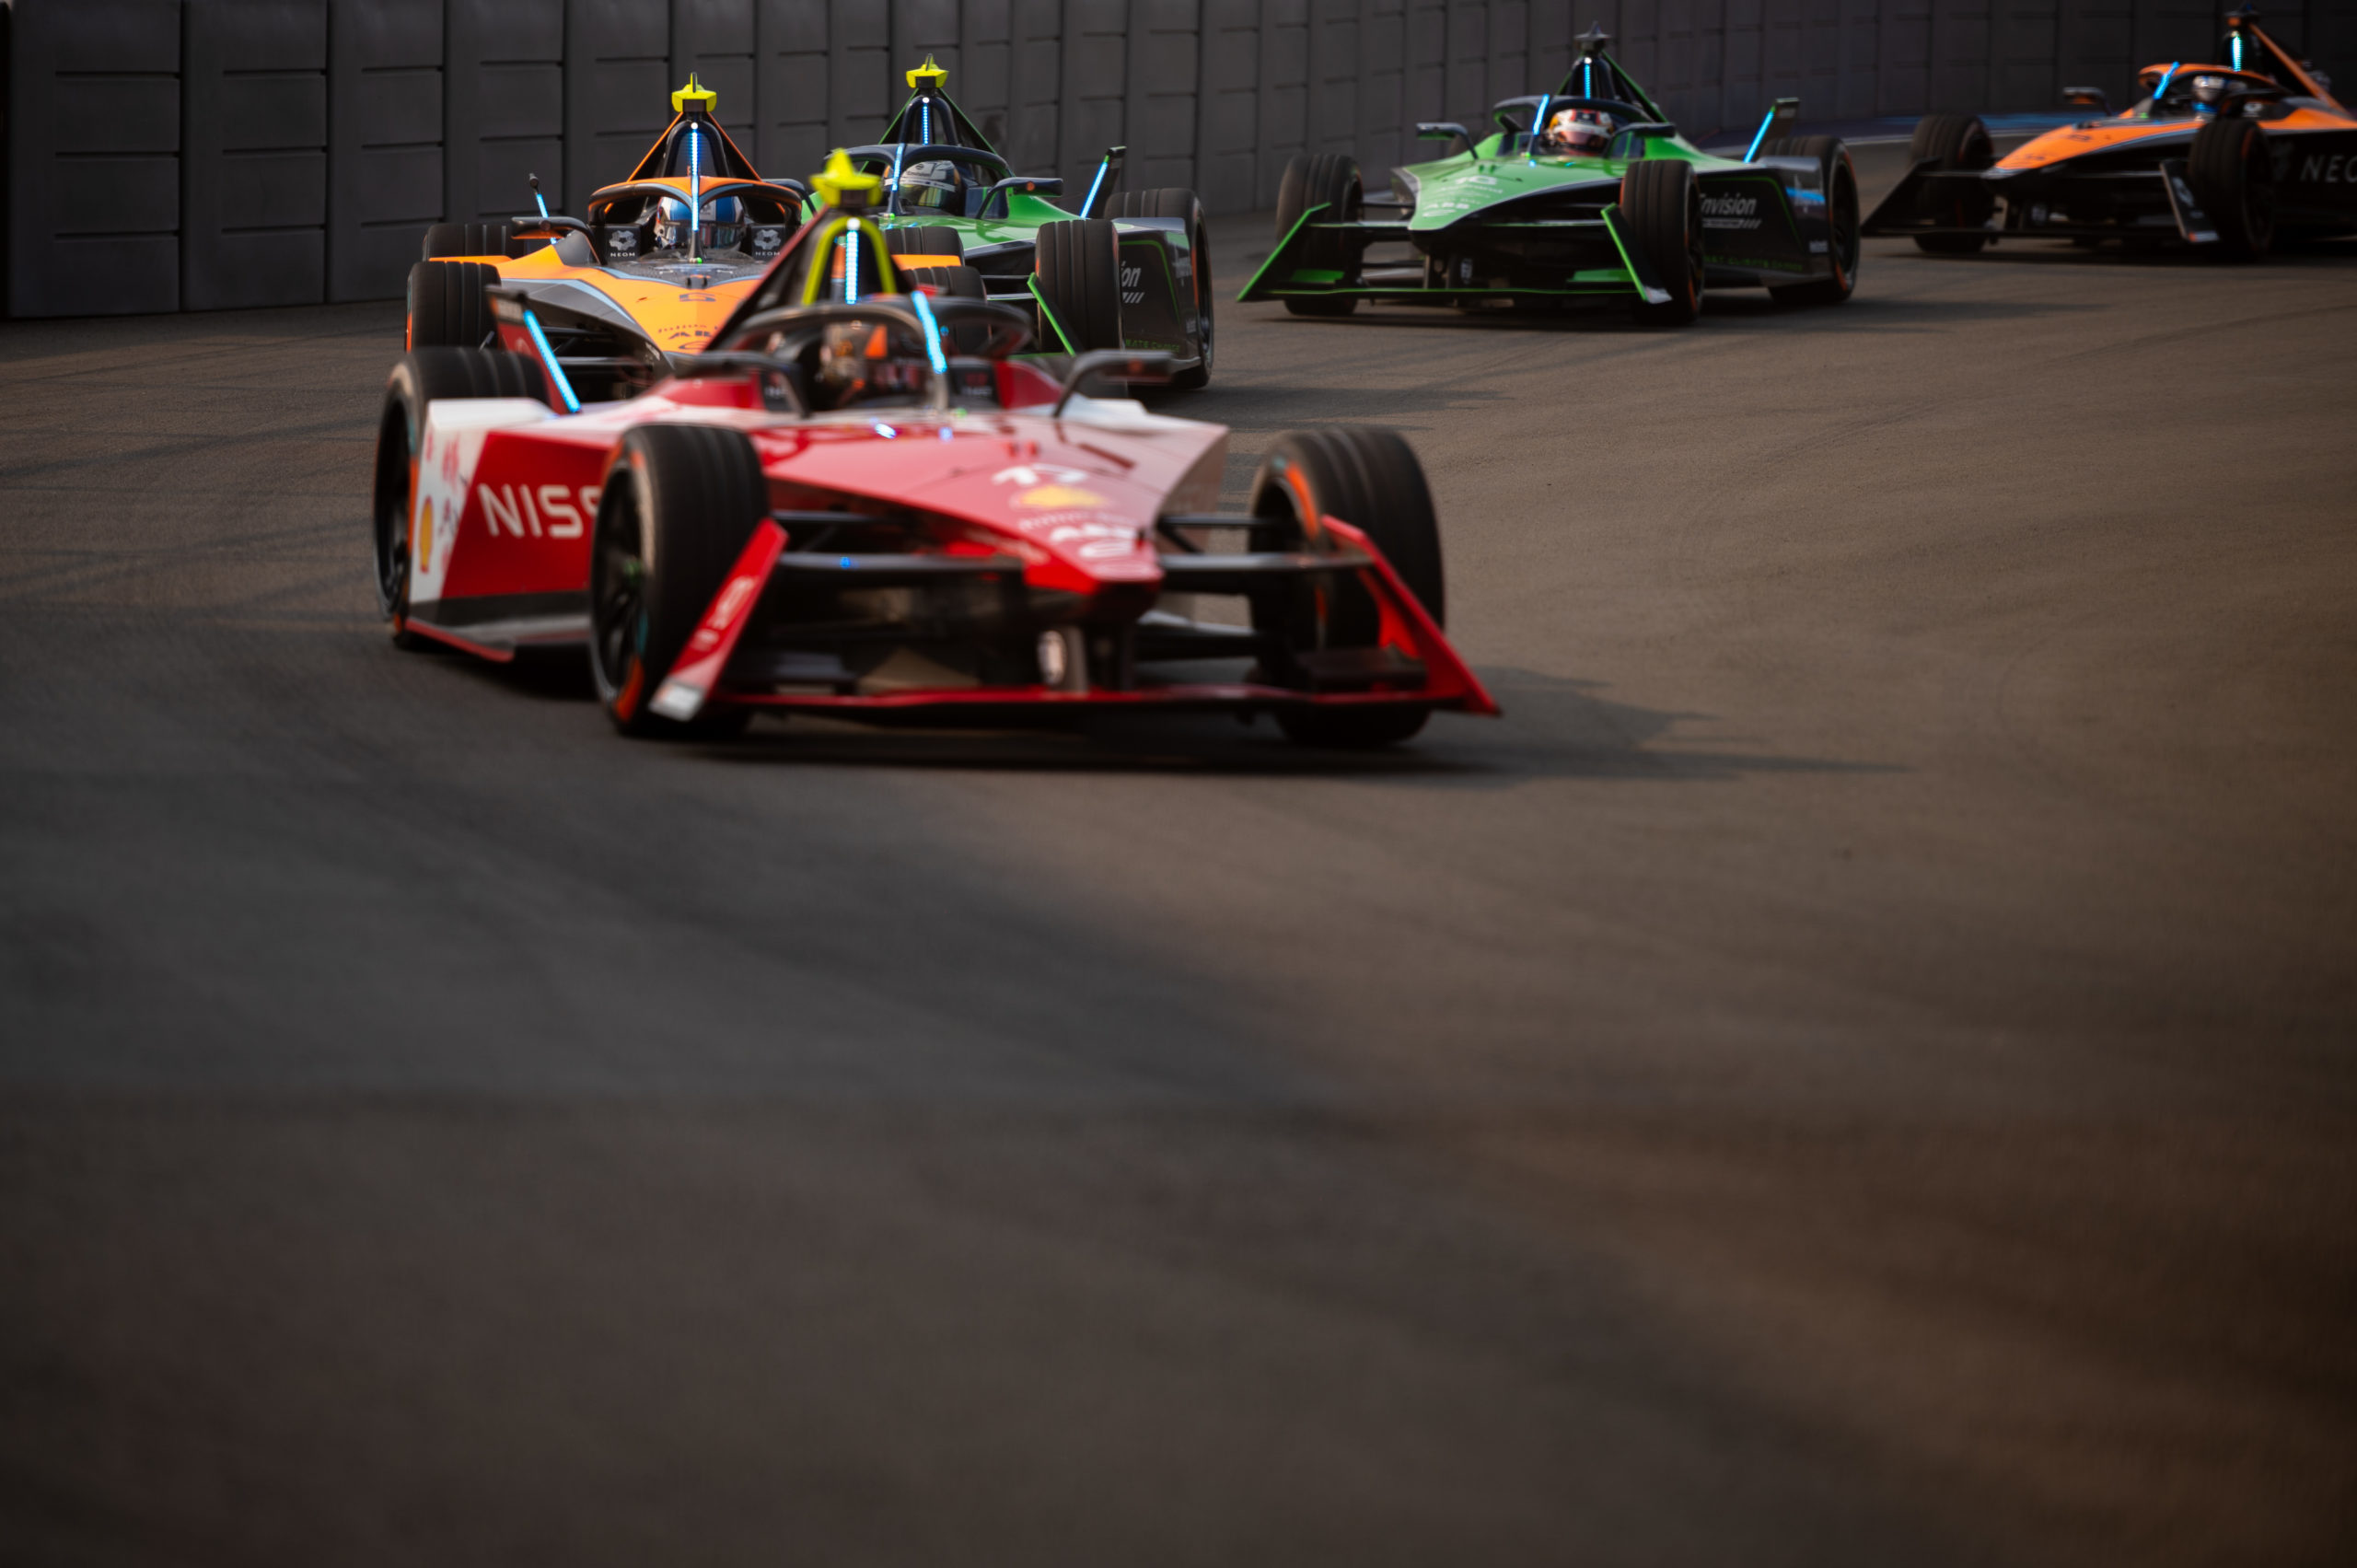 mc laren might need to make a big change to thrive in formula e